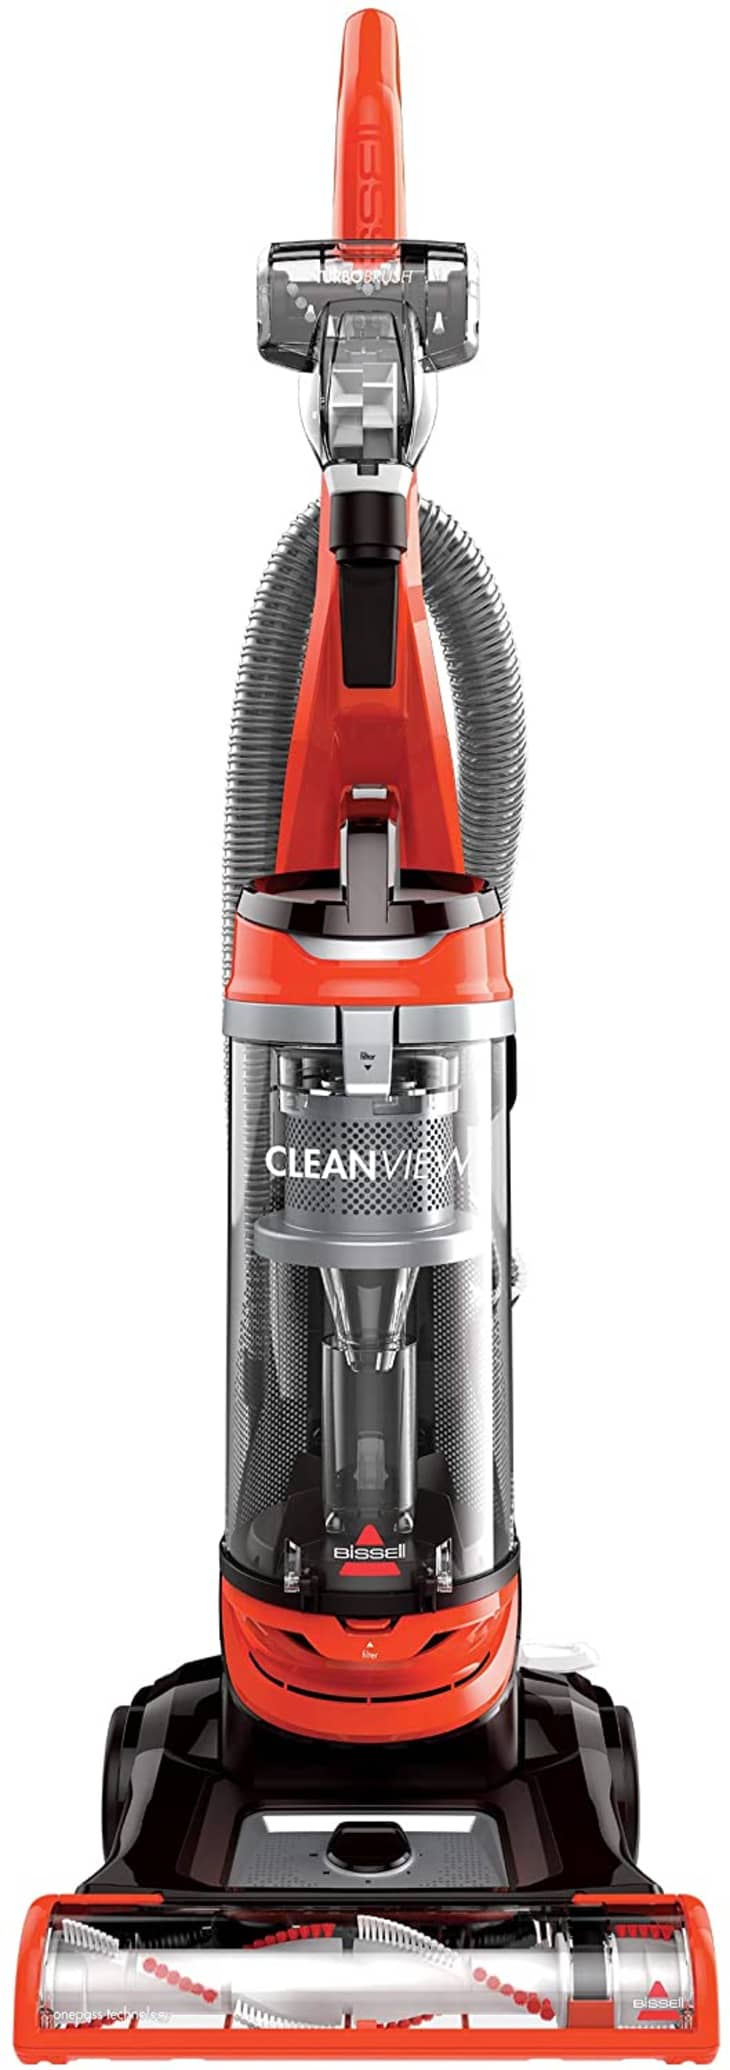 Product Image: Bissell Cleanview Bagless Vacuum Cleaner